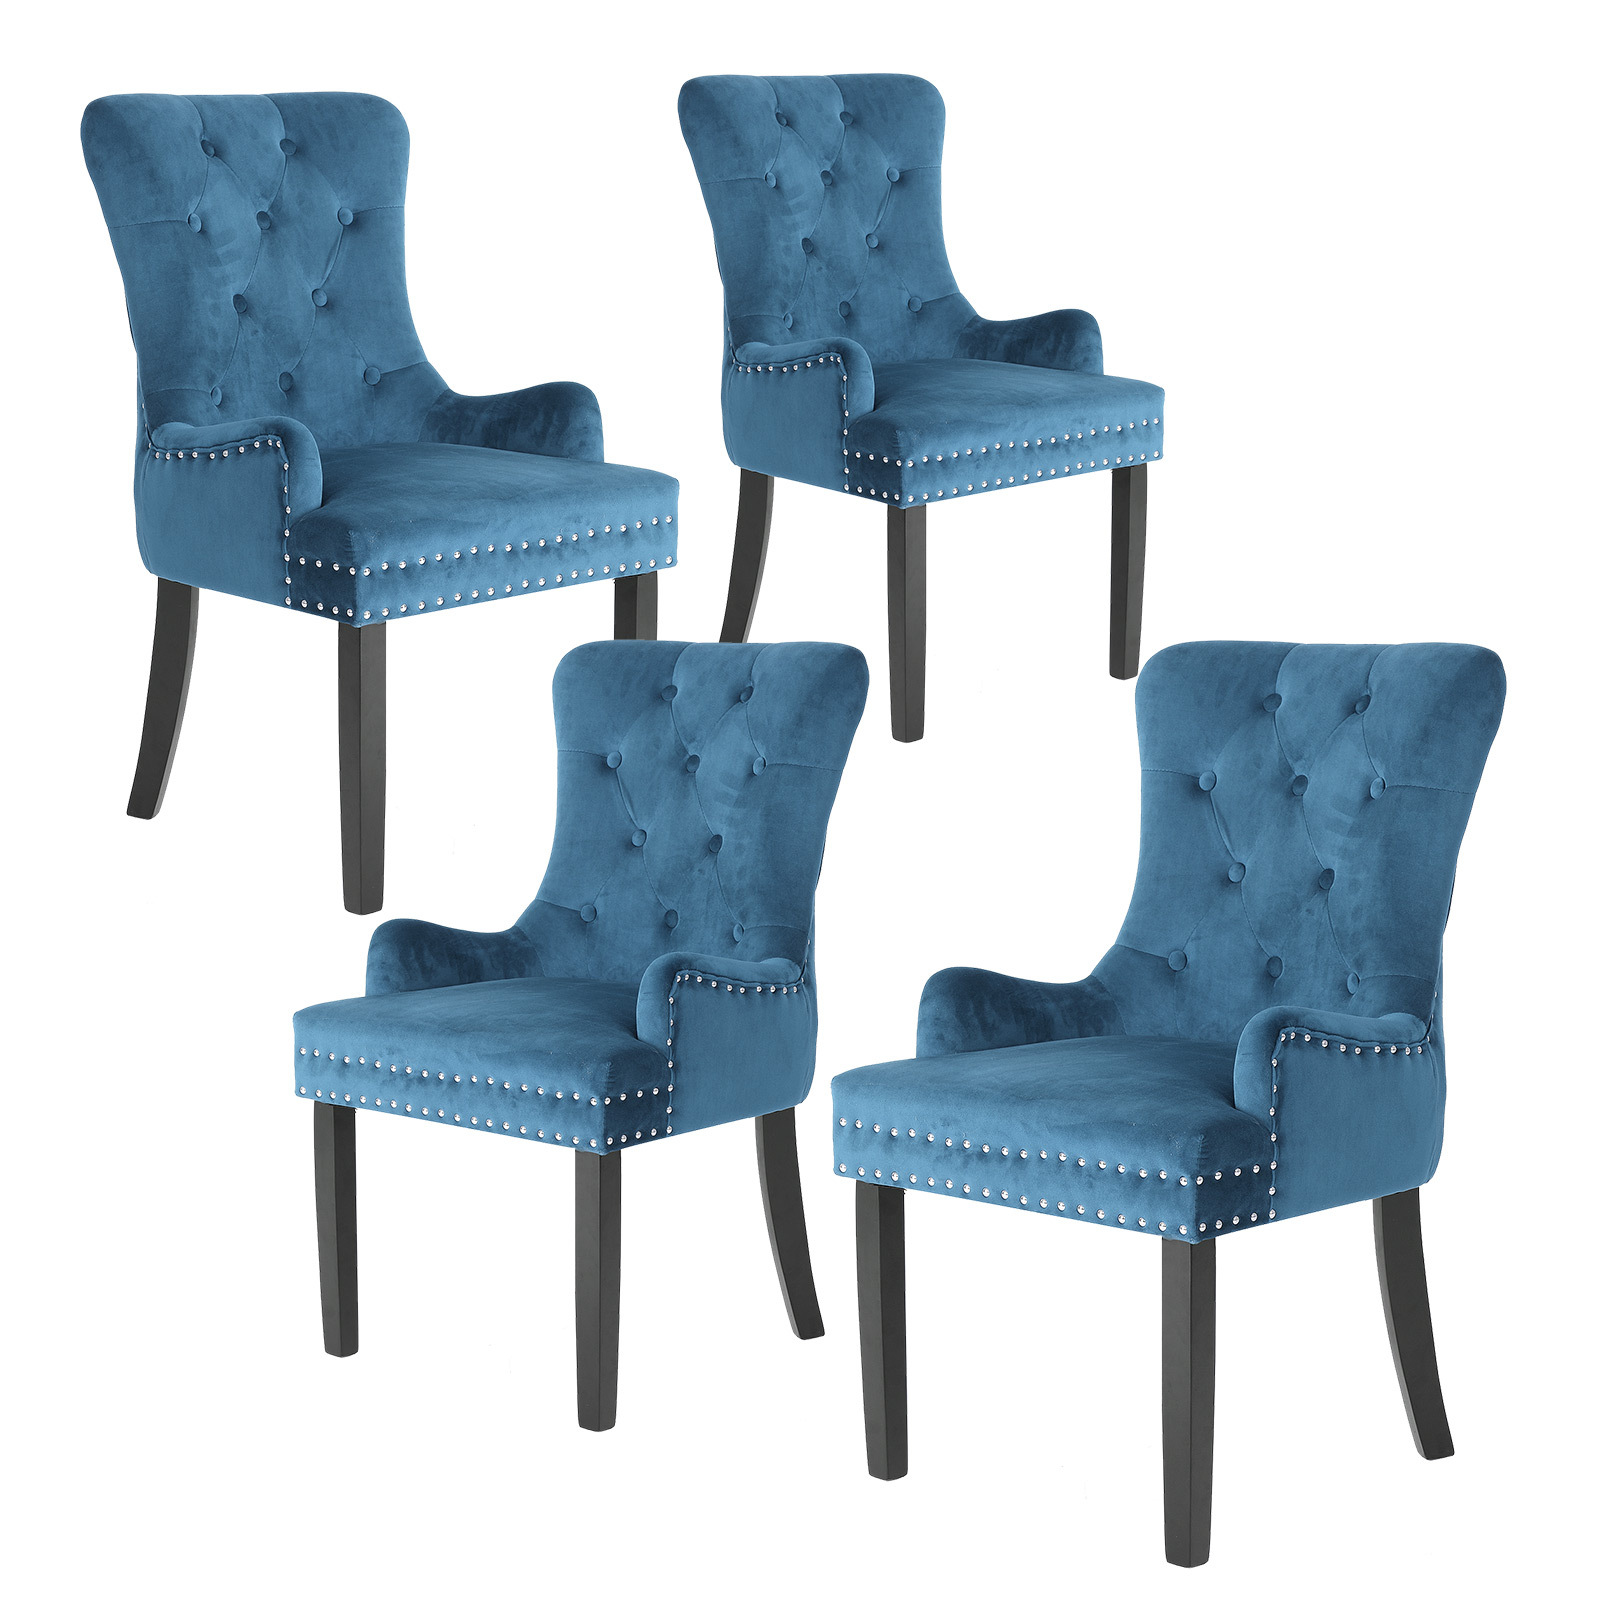 4X French Provincial Velvet with Ring Chair LISSE - NAVY BLUE